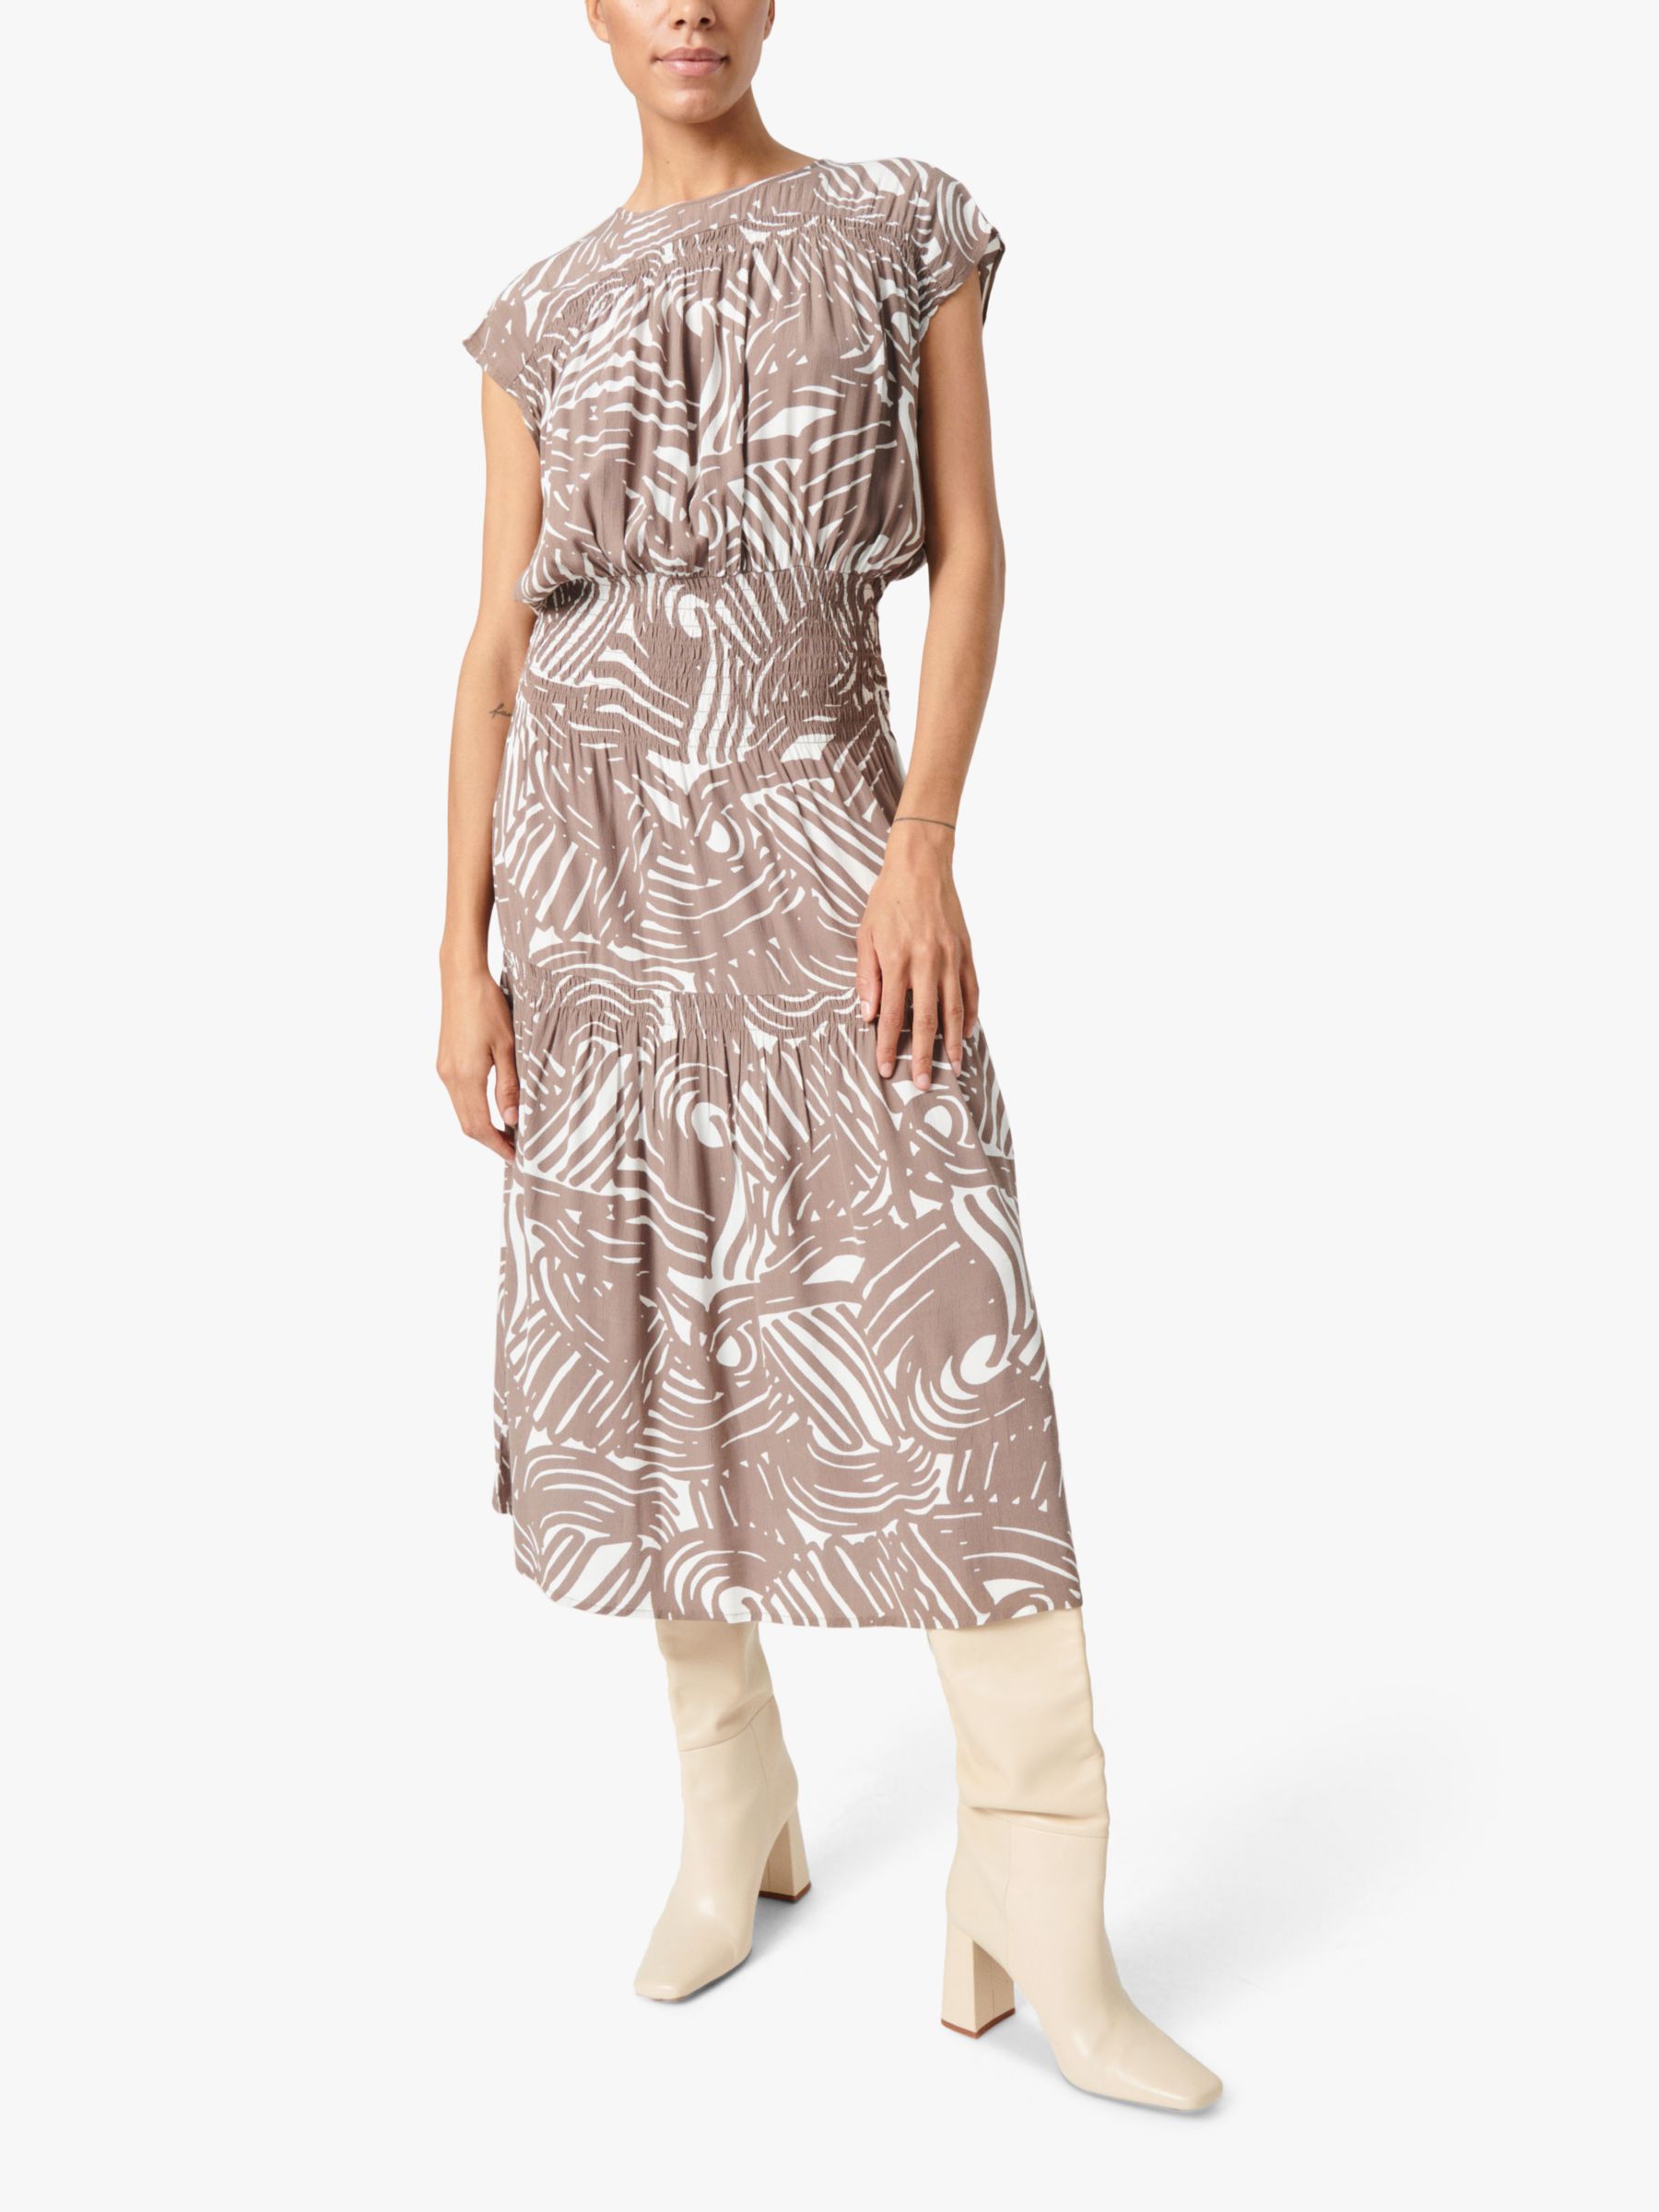 Buy Soaked In Luxury Marian Ecovero Smock Midi Dress, Walnut Lines Online at johnlewis.com